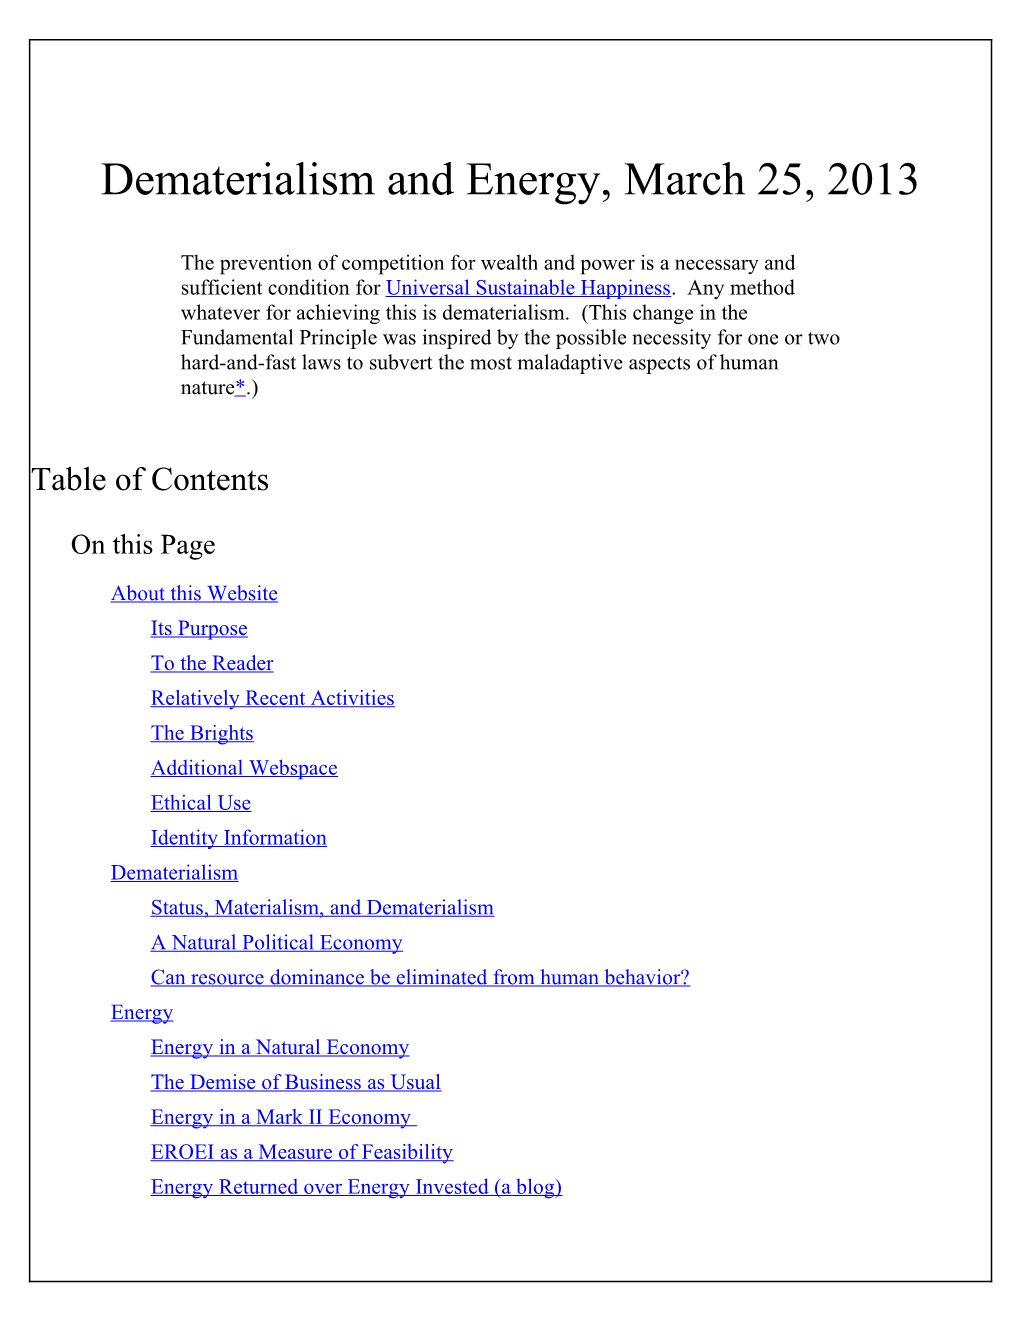 Dematerialism and Energy, 03.25.13